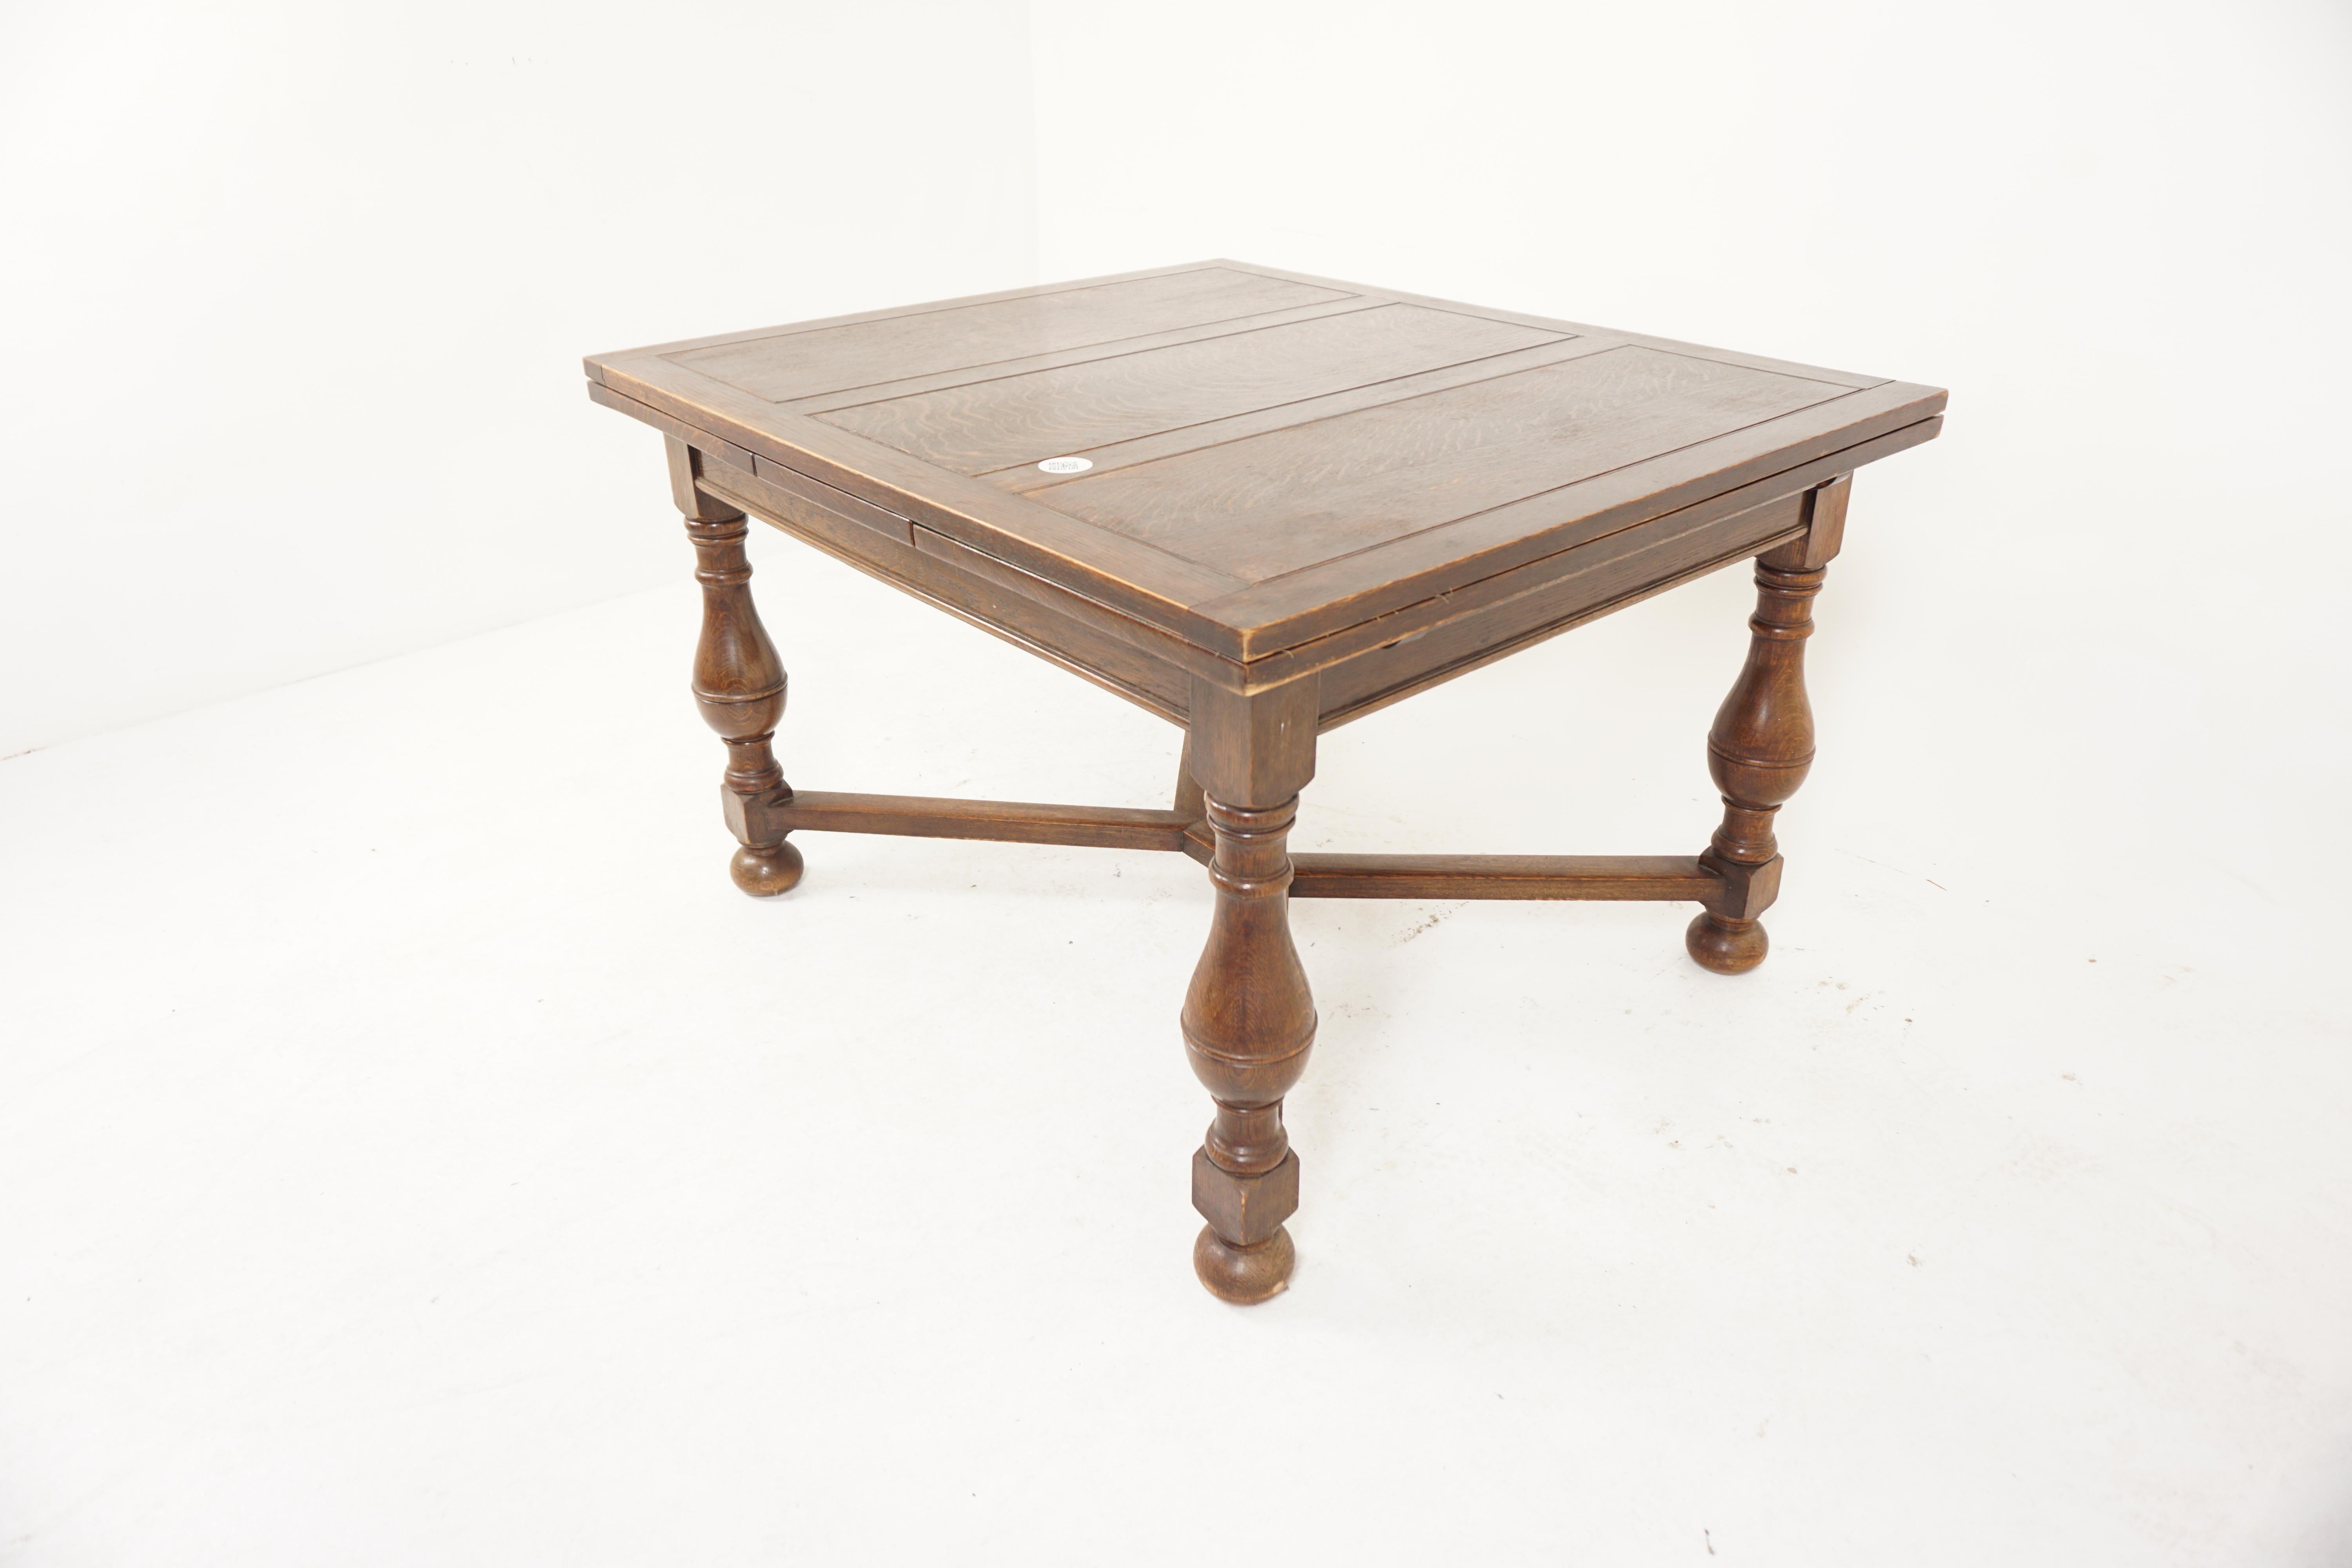 Large tiger oak refectory pull out draw leaf dining table, Scotland 1920, H744

Scotland 1920
Solid Tiger Oak
Original Finish

3 Panelled top
Pair of slide out leaves on the end
All standing on four large bulbous turned legs
With very thick